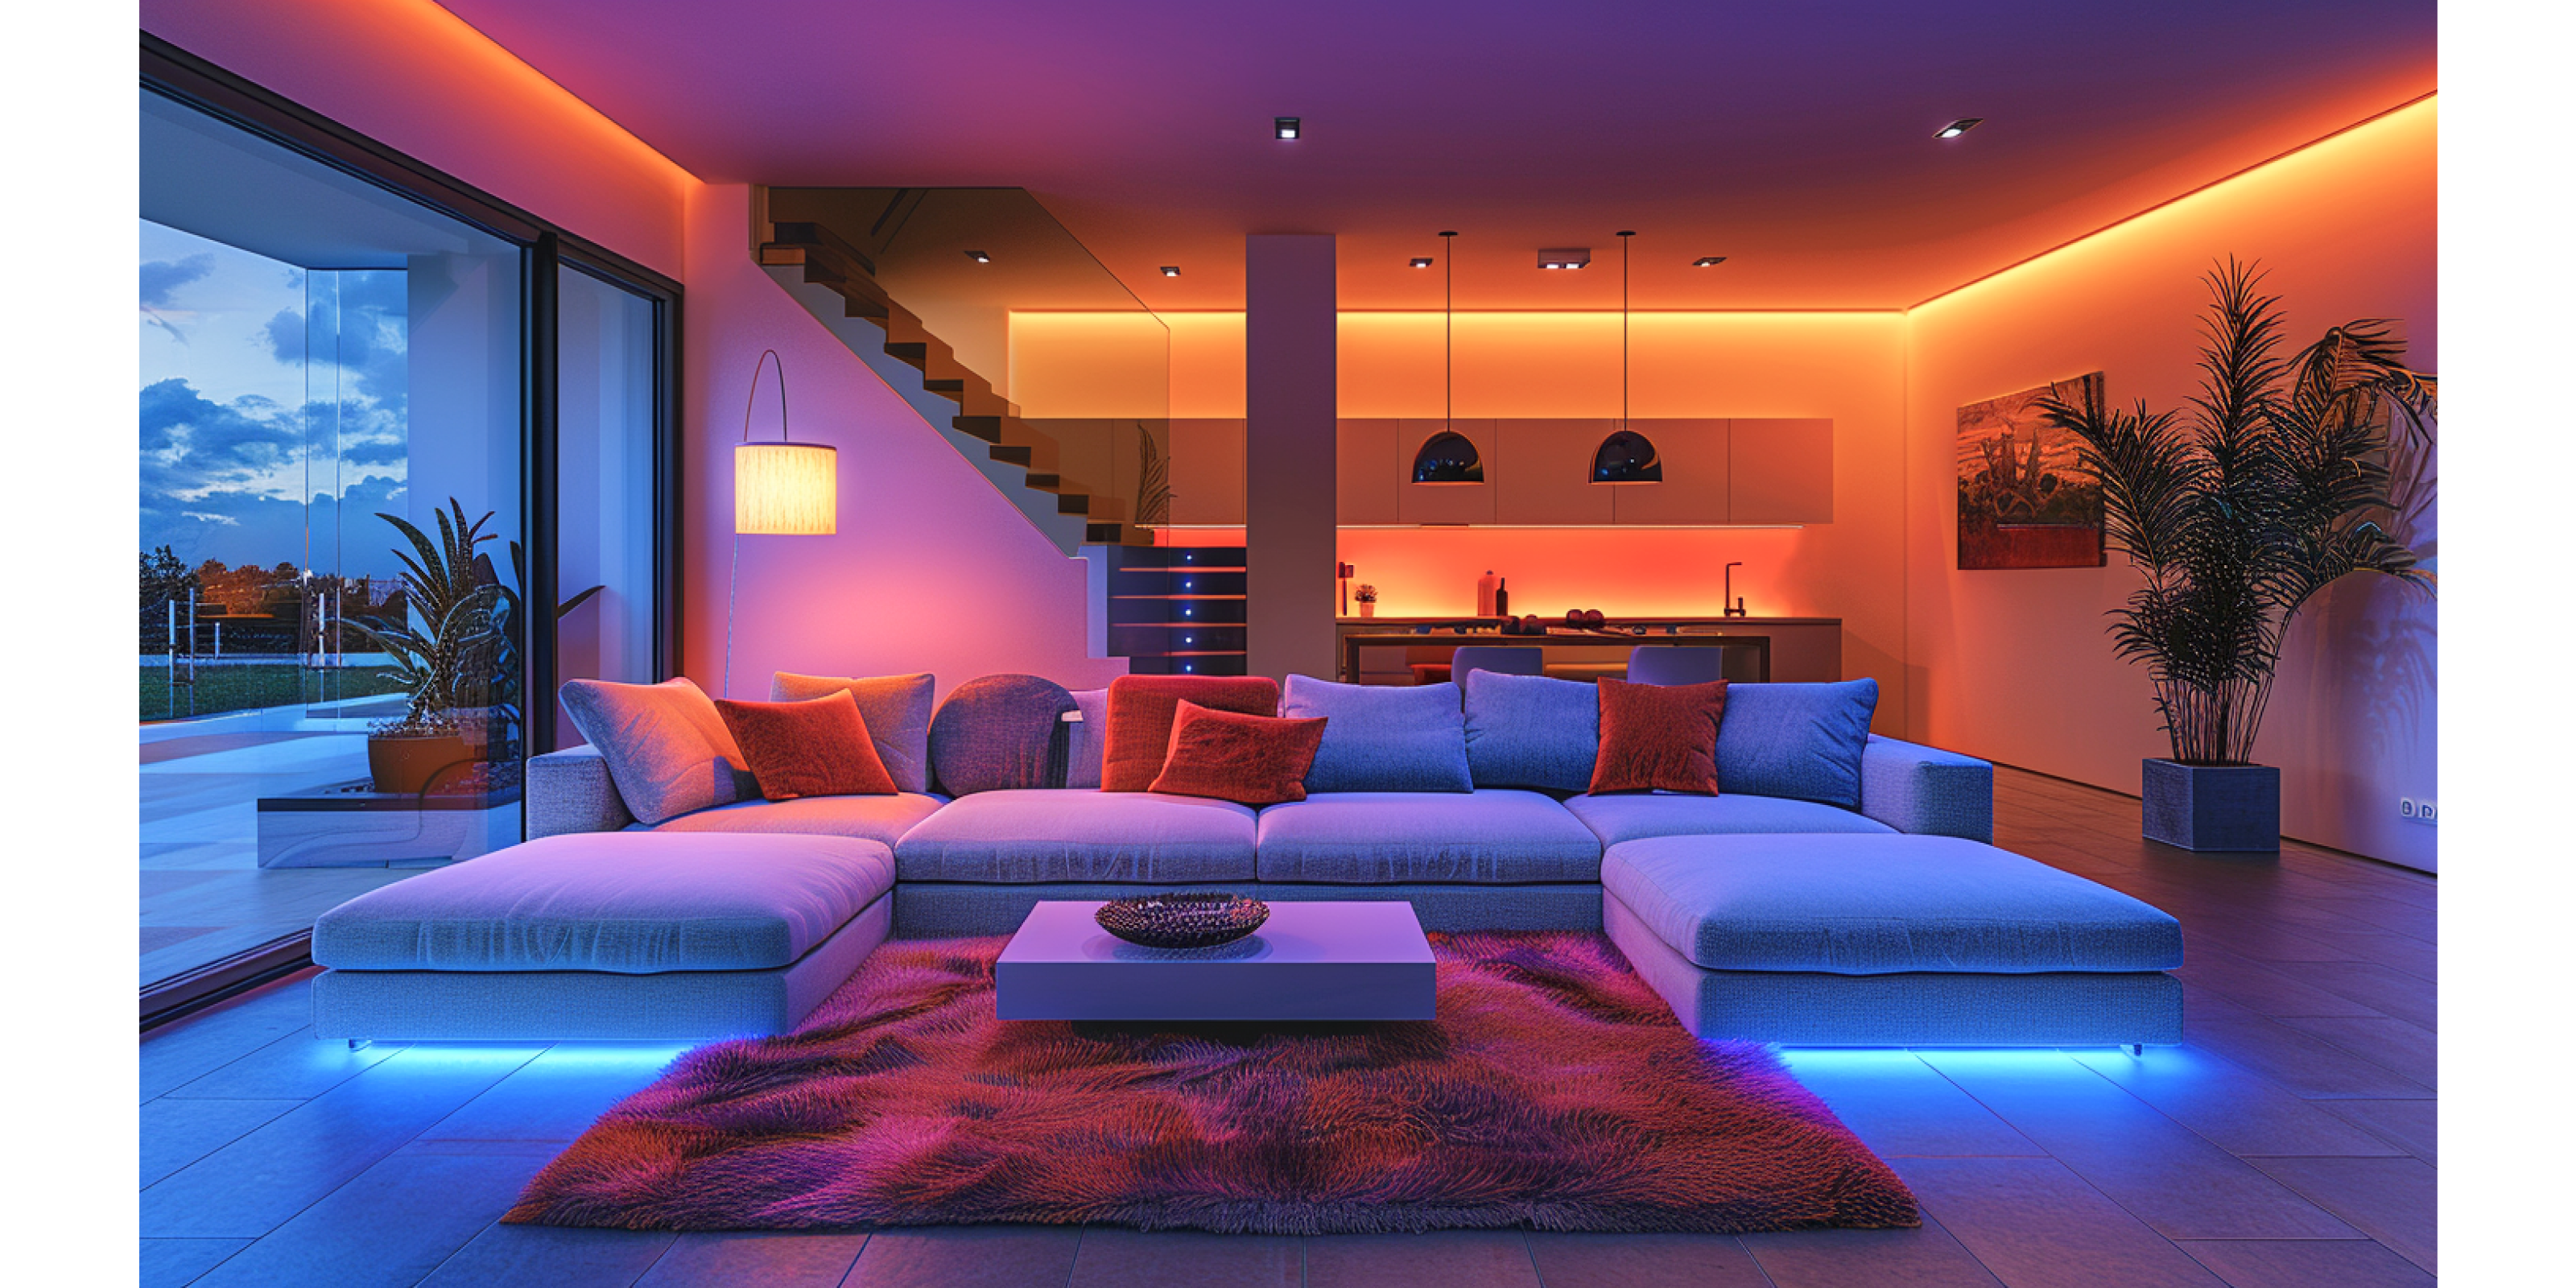 Sengled smart bulbs provide intelligent lighting solutions for your home. Control and customize your lighting with ease using the Sengled app. Enjoy features such as voice control, scheduling, and color options. Enhance your space with energy-efficient and versatile smart bulbs from Sengled.